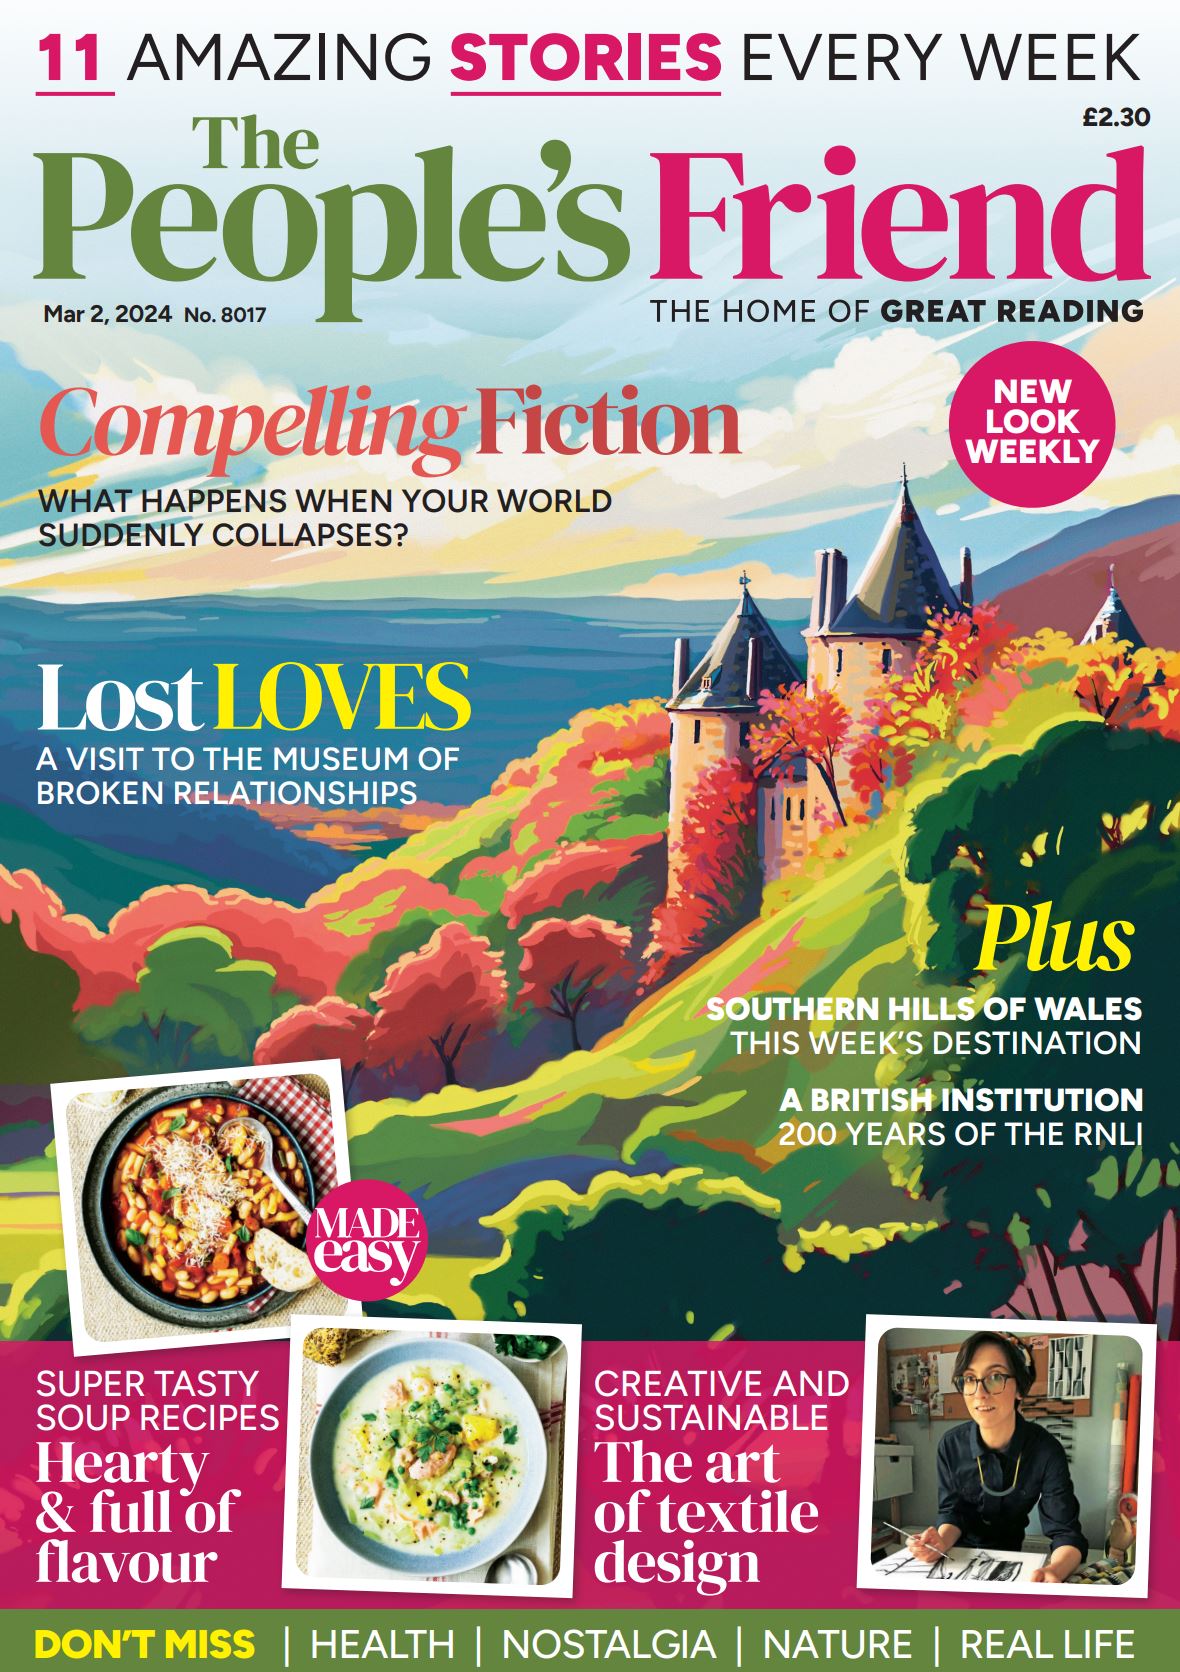 March 2 2024 cover of The People's Friend magazine